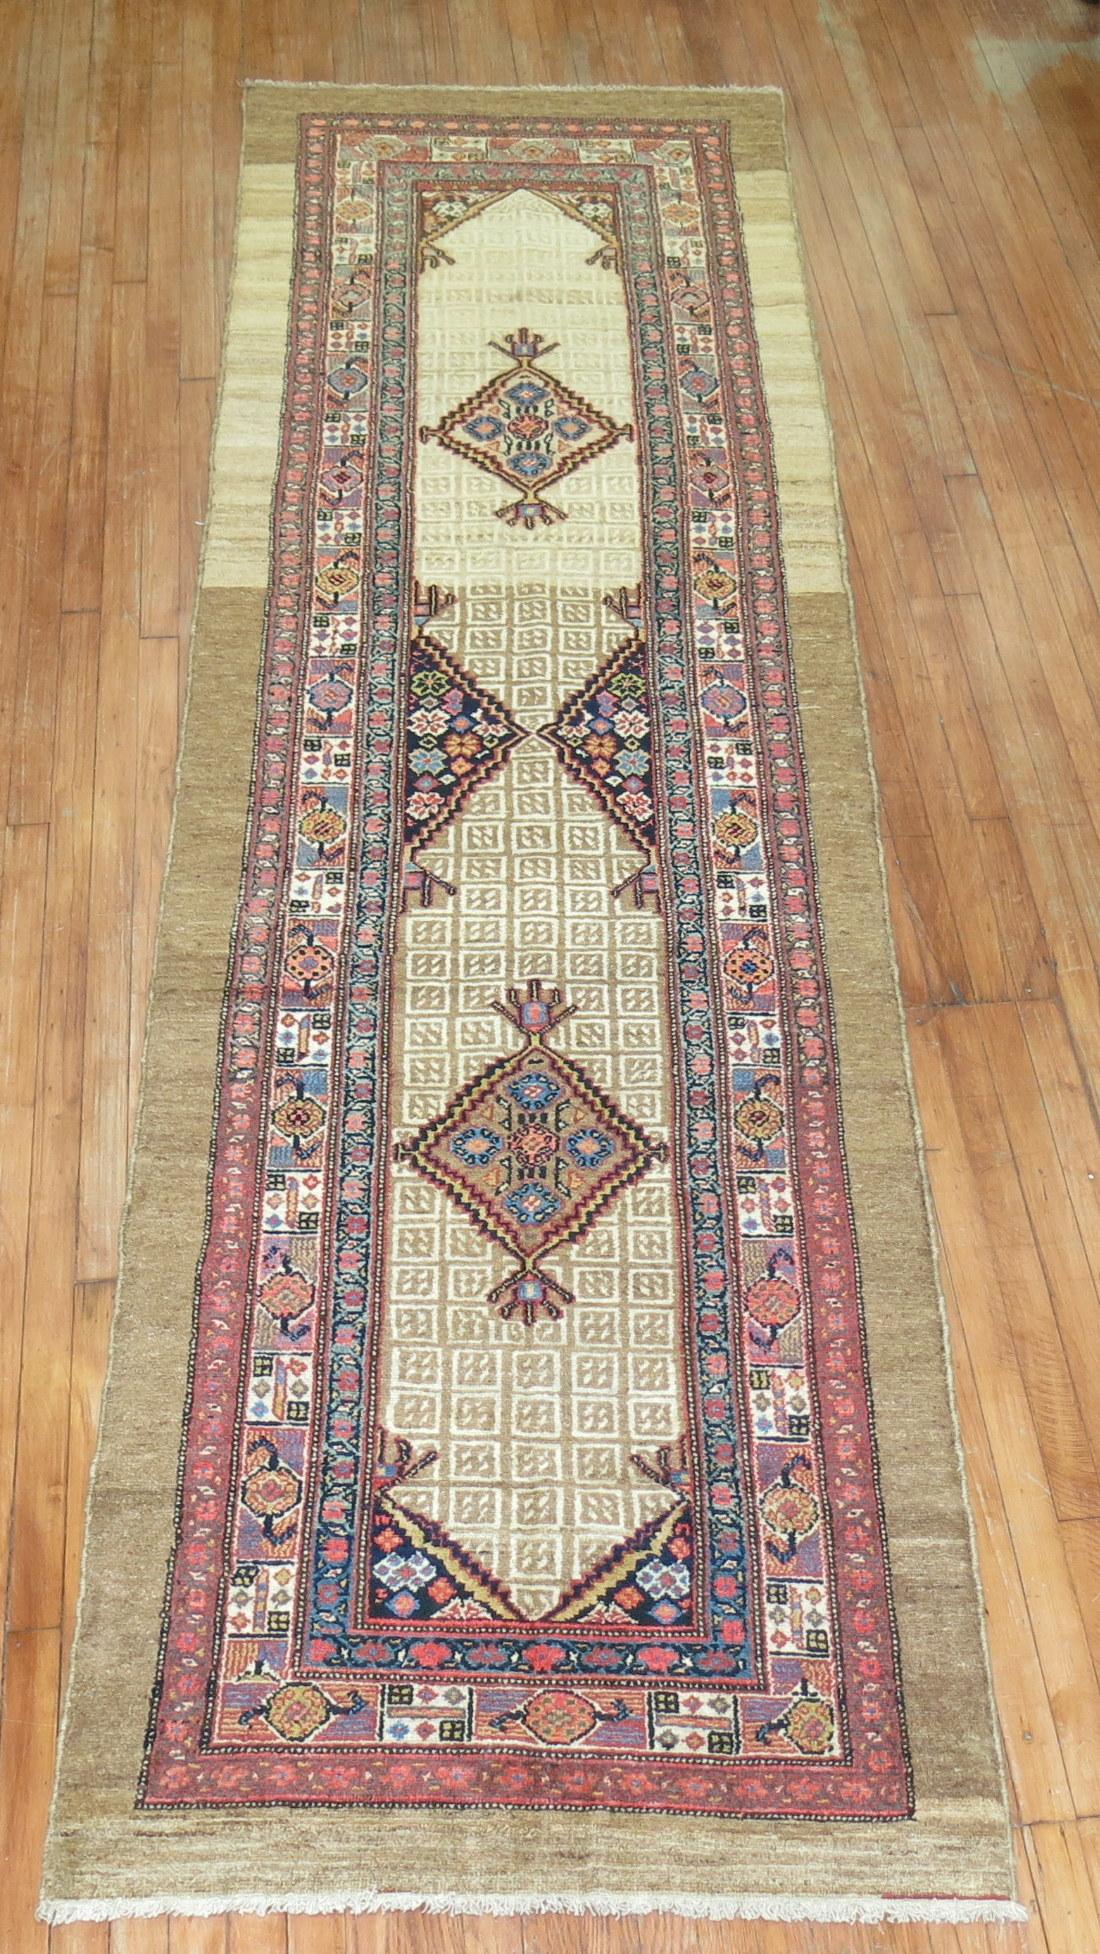 An authentic early 20th century Persian Serab runner with 2 geometric medallions on a camel field and multi-band border in rust, teal and ivory.

Measures: 3'2